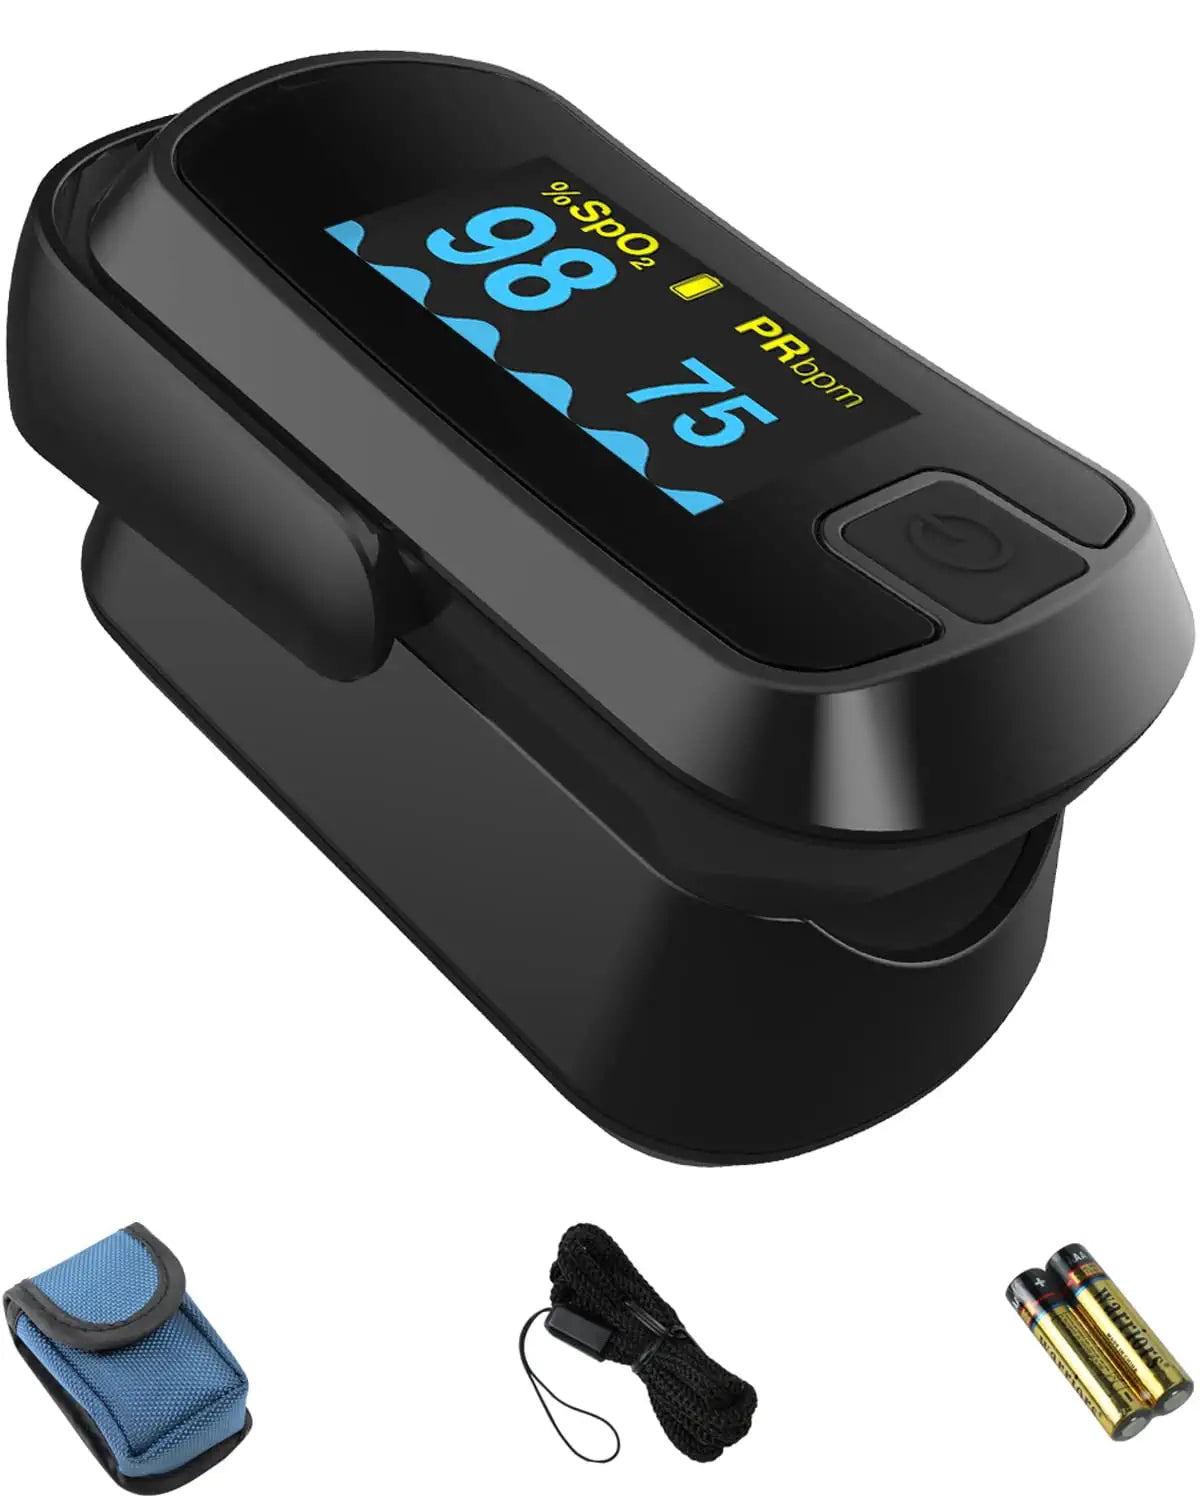 MIBEST OLED Finger Pulse Oximeter with Respiration Count - Oxygen Meter Finger Pulse Oximeter with Respiration Reading - Blood Oxygen Saturation Monitor, Fast Pulse Rate Reading with Perfusion Index